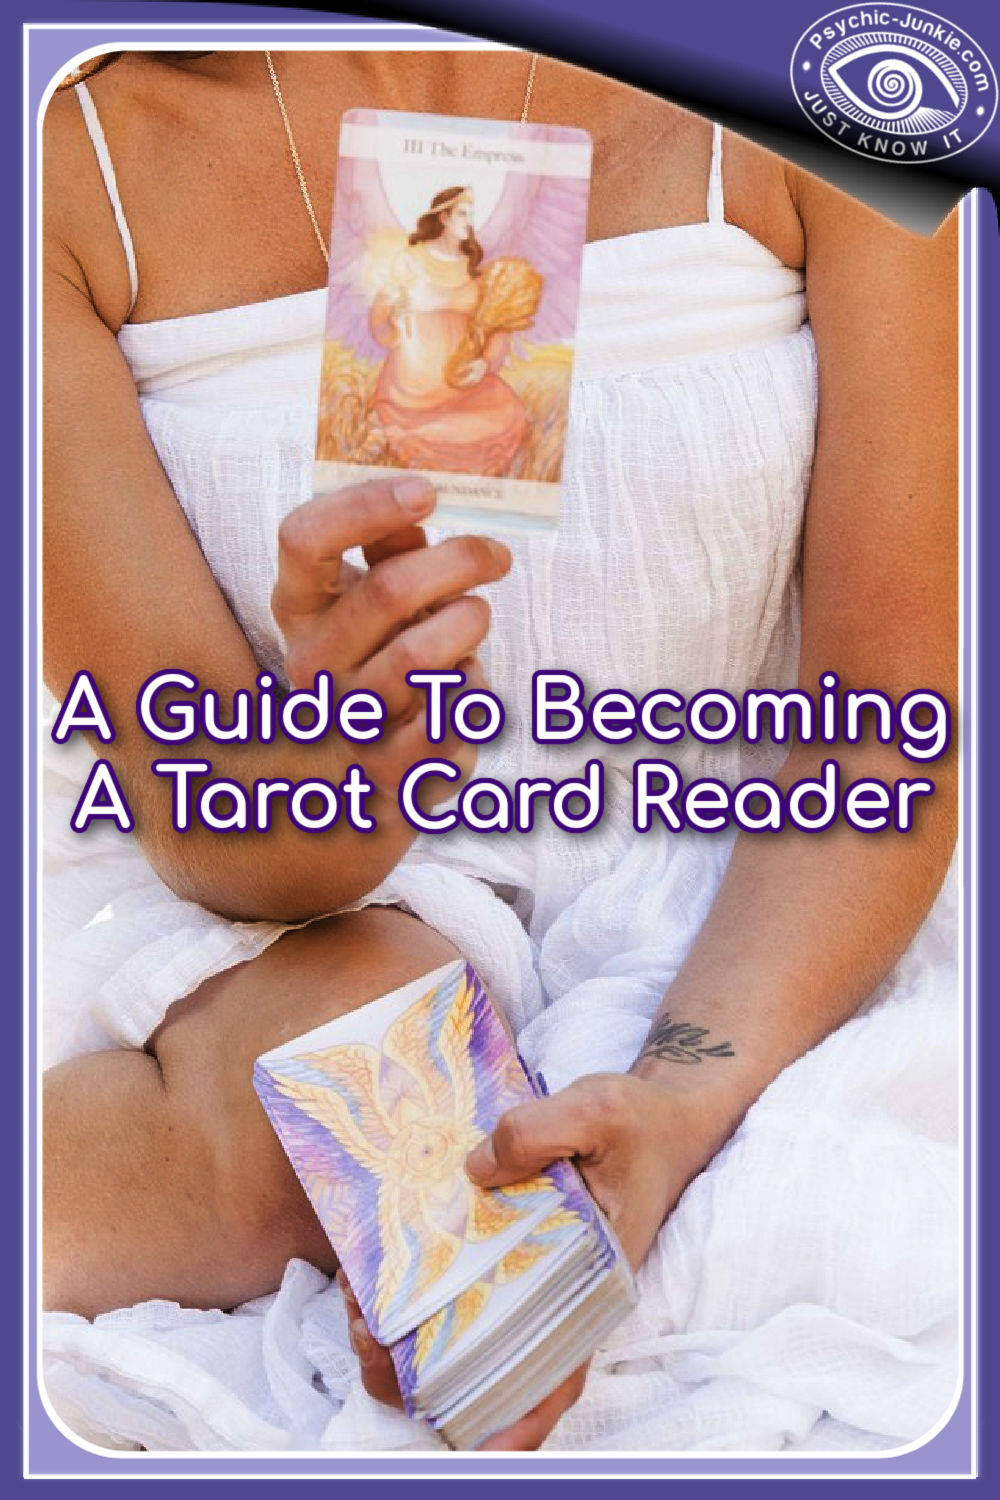 A Guide To Becoming A Tarot Card Reader